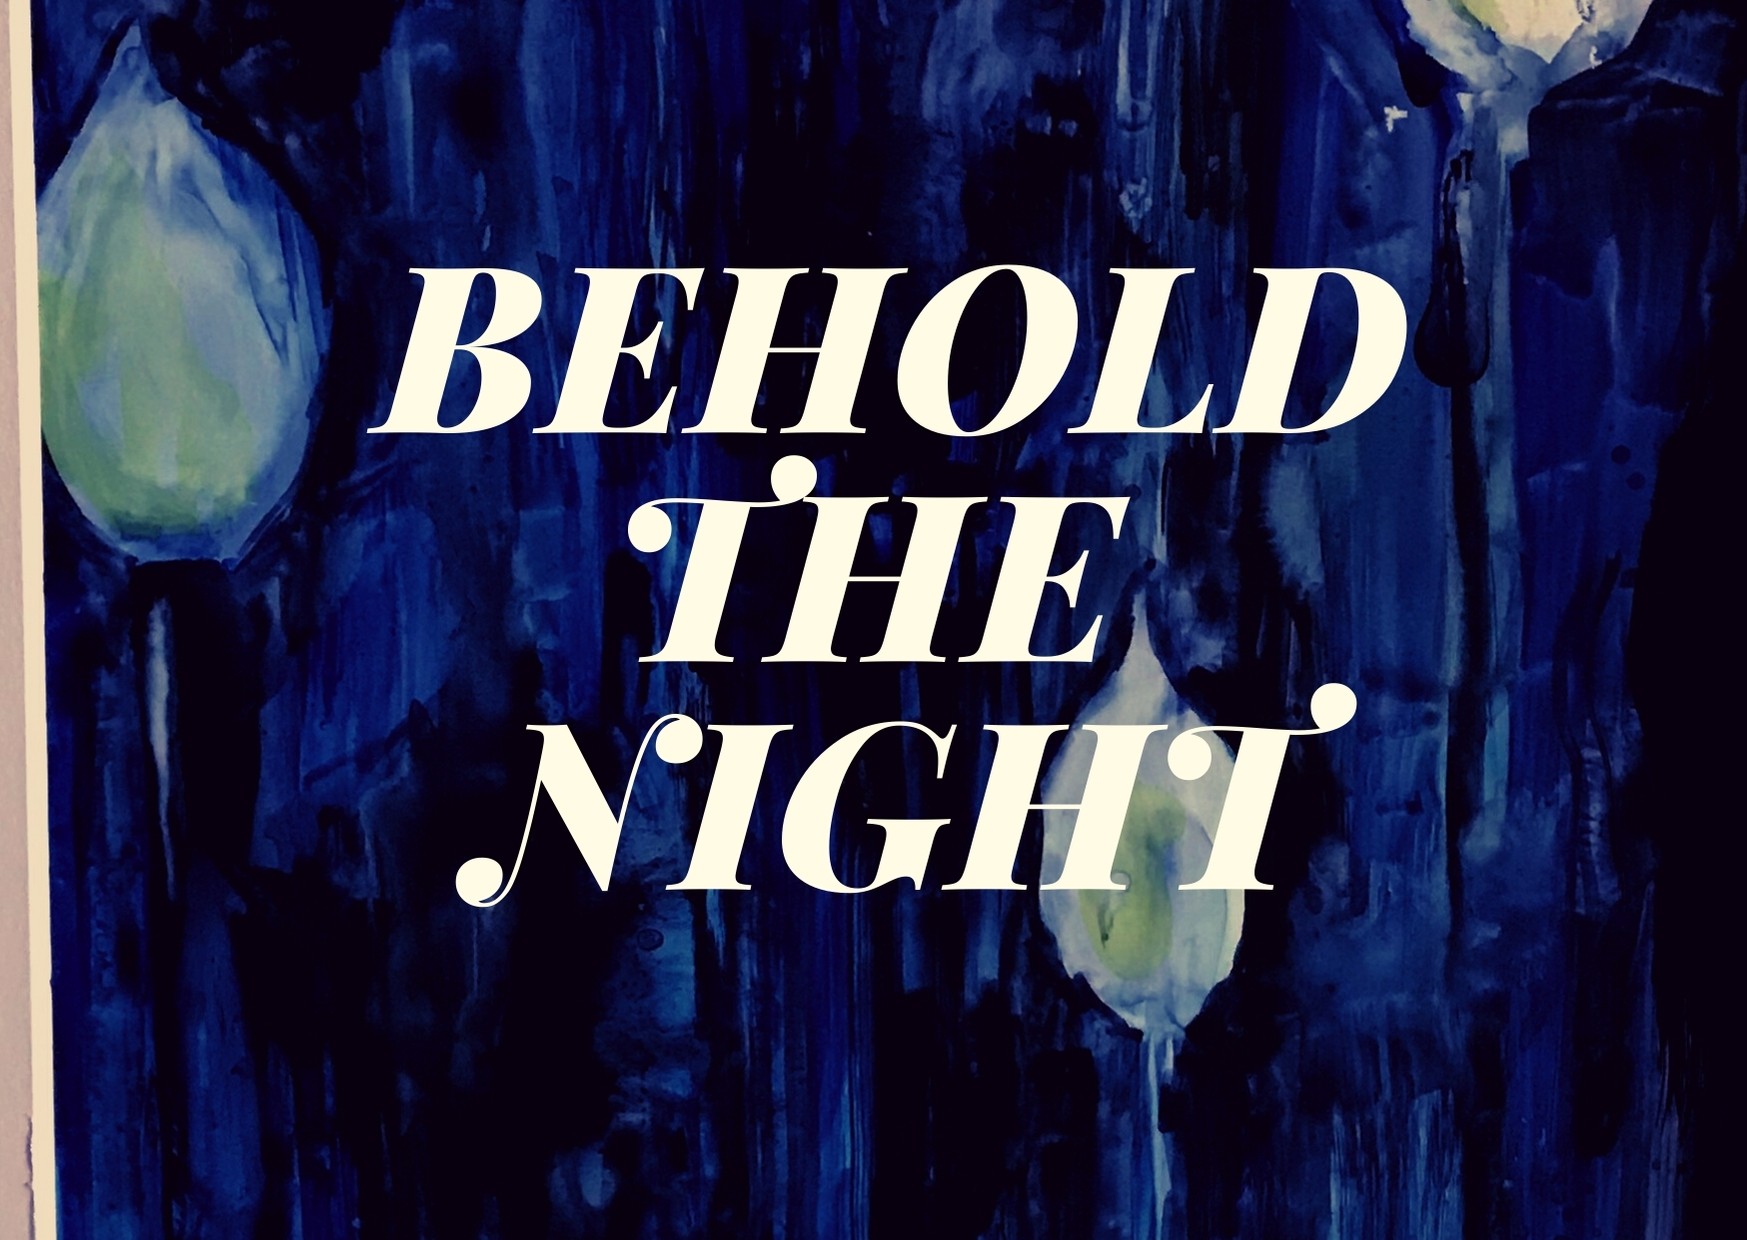 Behold the Night